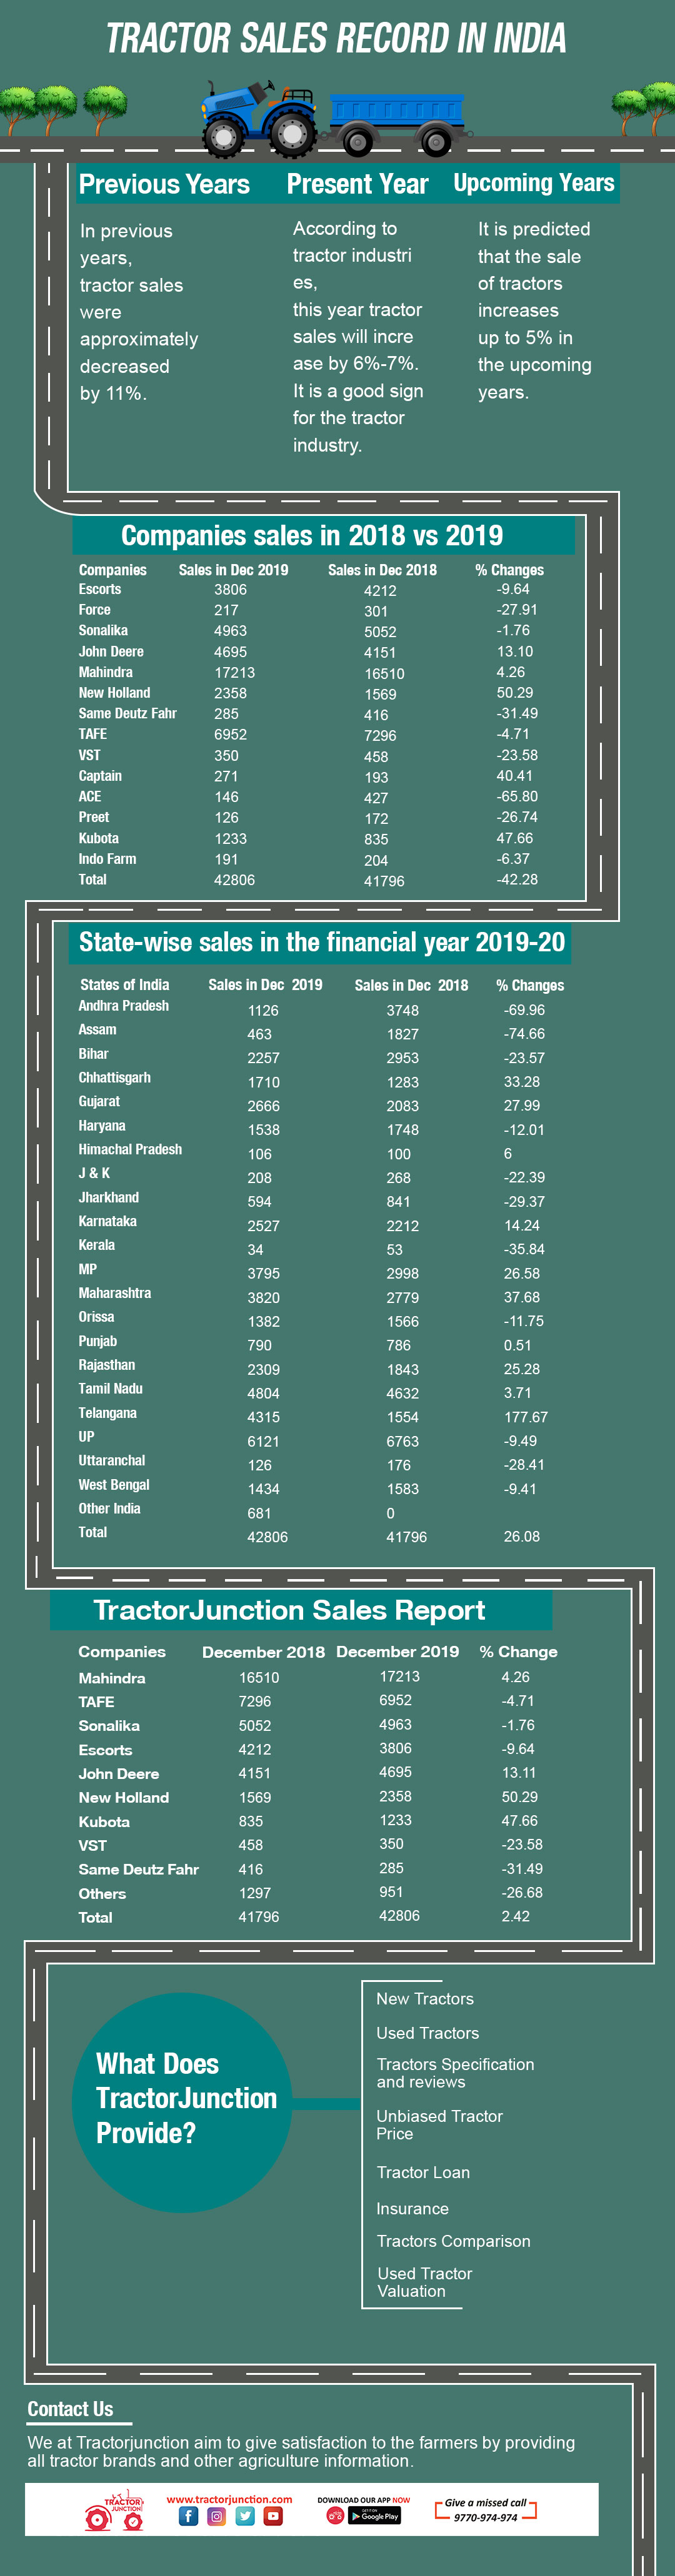 Infographic Tractor Sales Record in India